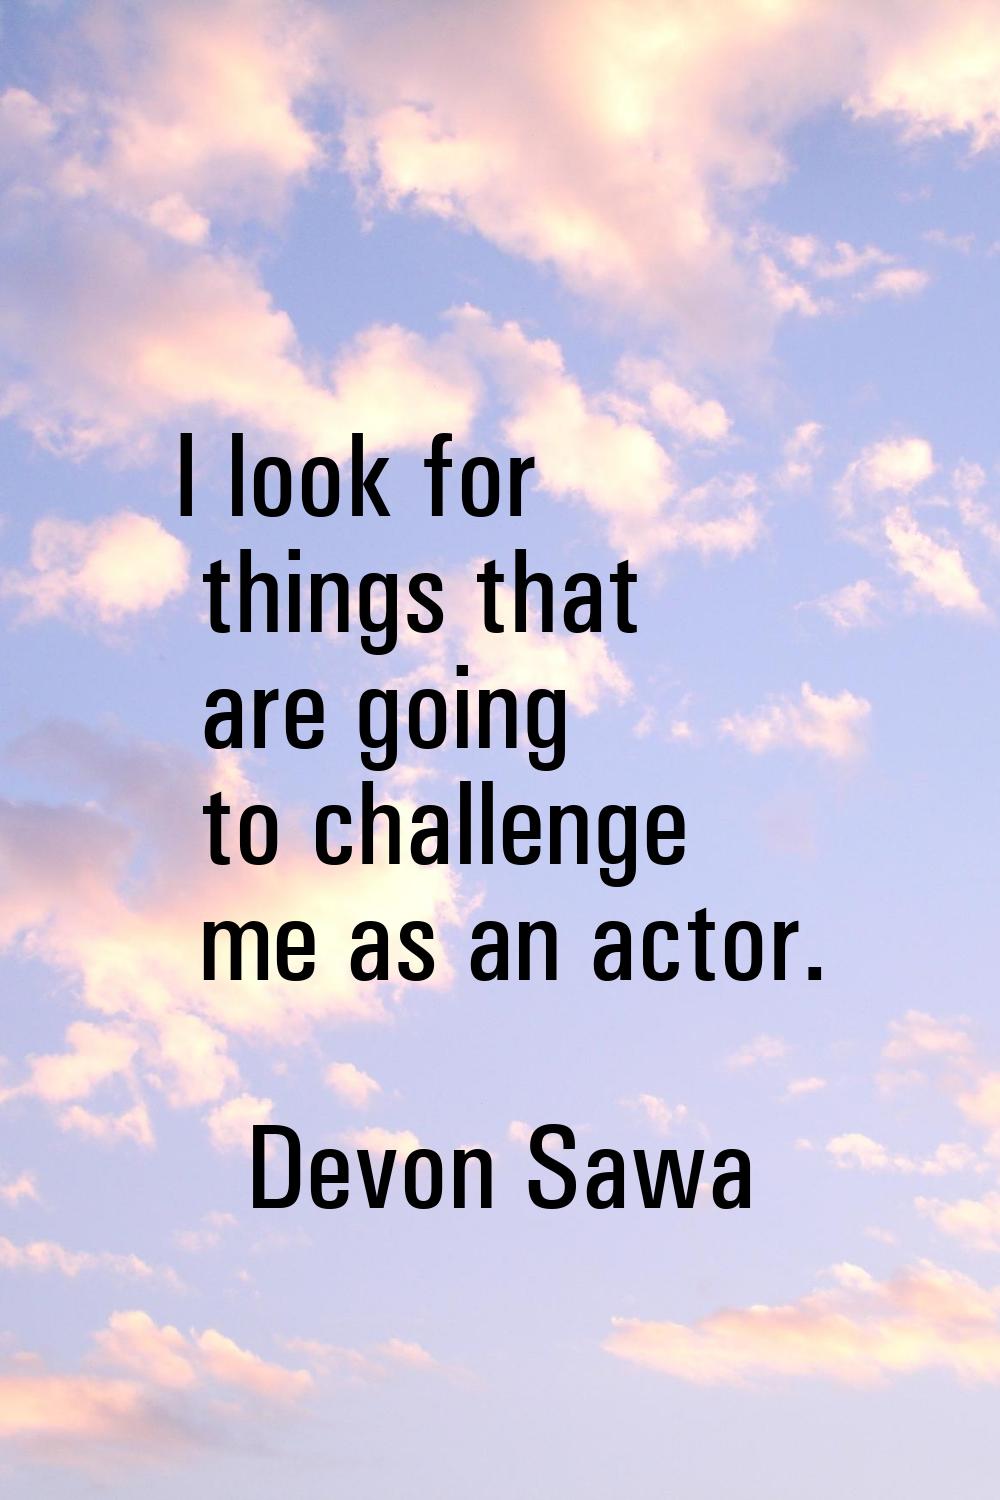 I look for things that are going to challenge me as an actor.